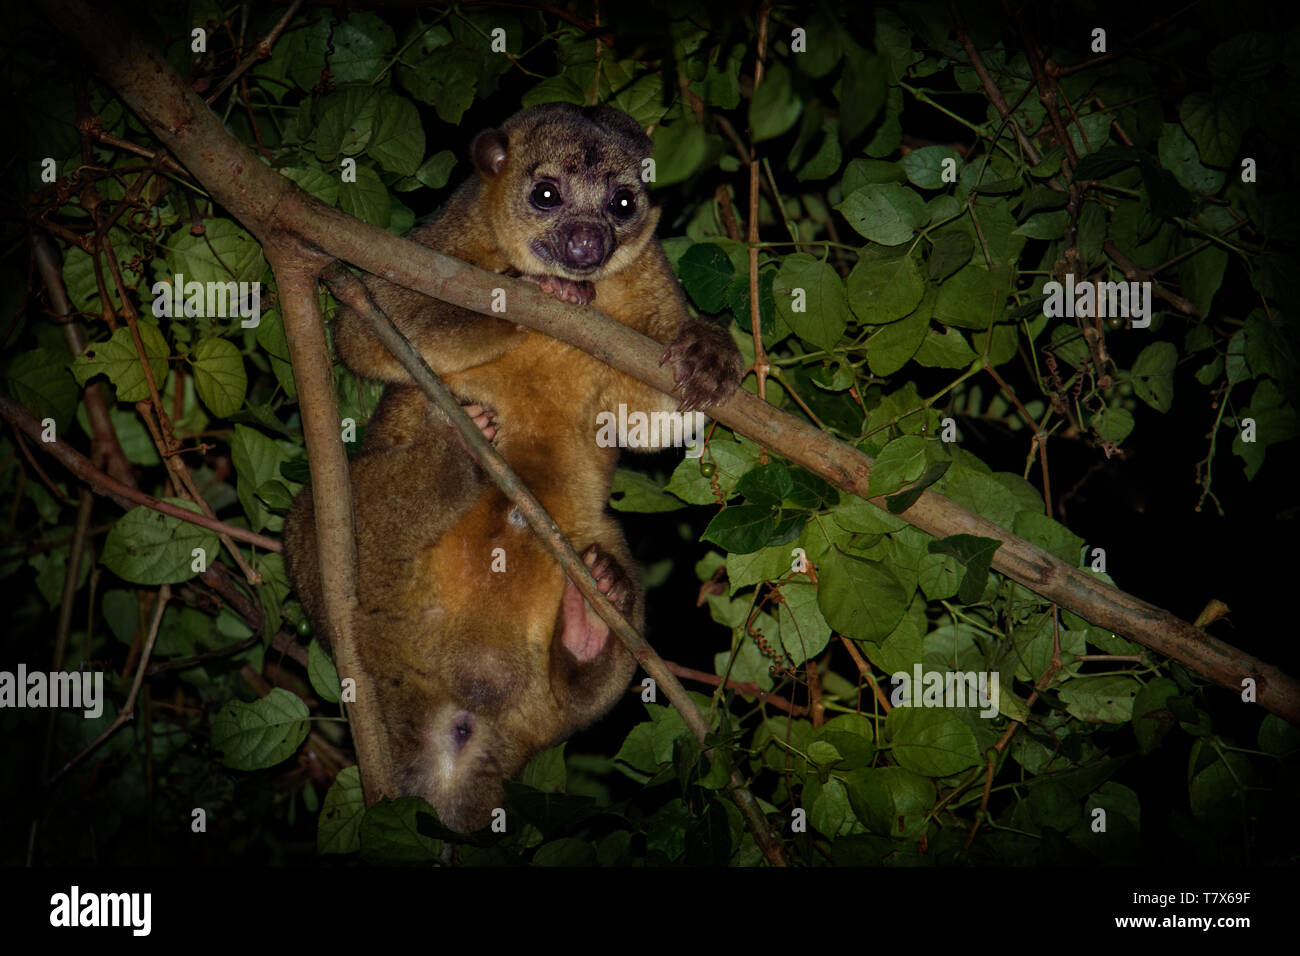 Kinkajou - Potos flavus, rainforest mammal of the family Procyonidae related to olingos, coatis, raccoons, and the ringtail and cacomistle. also known Stock Photo